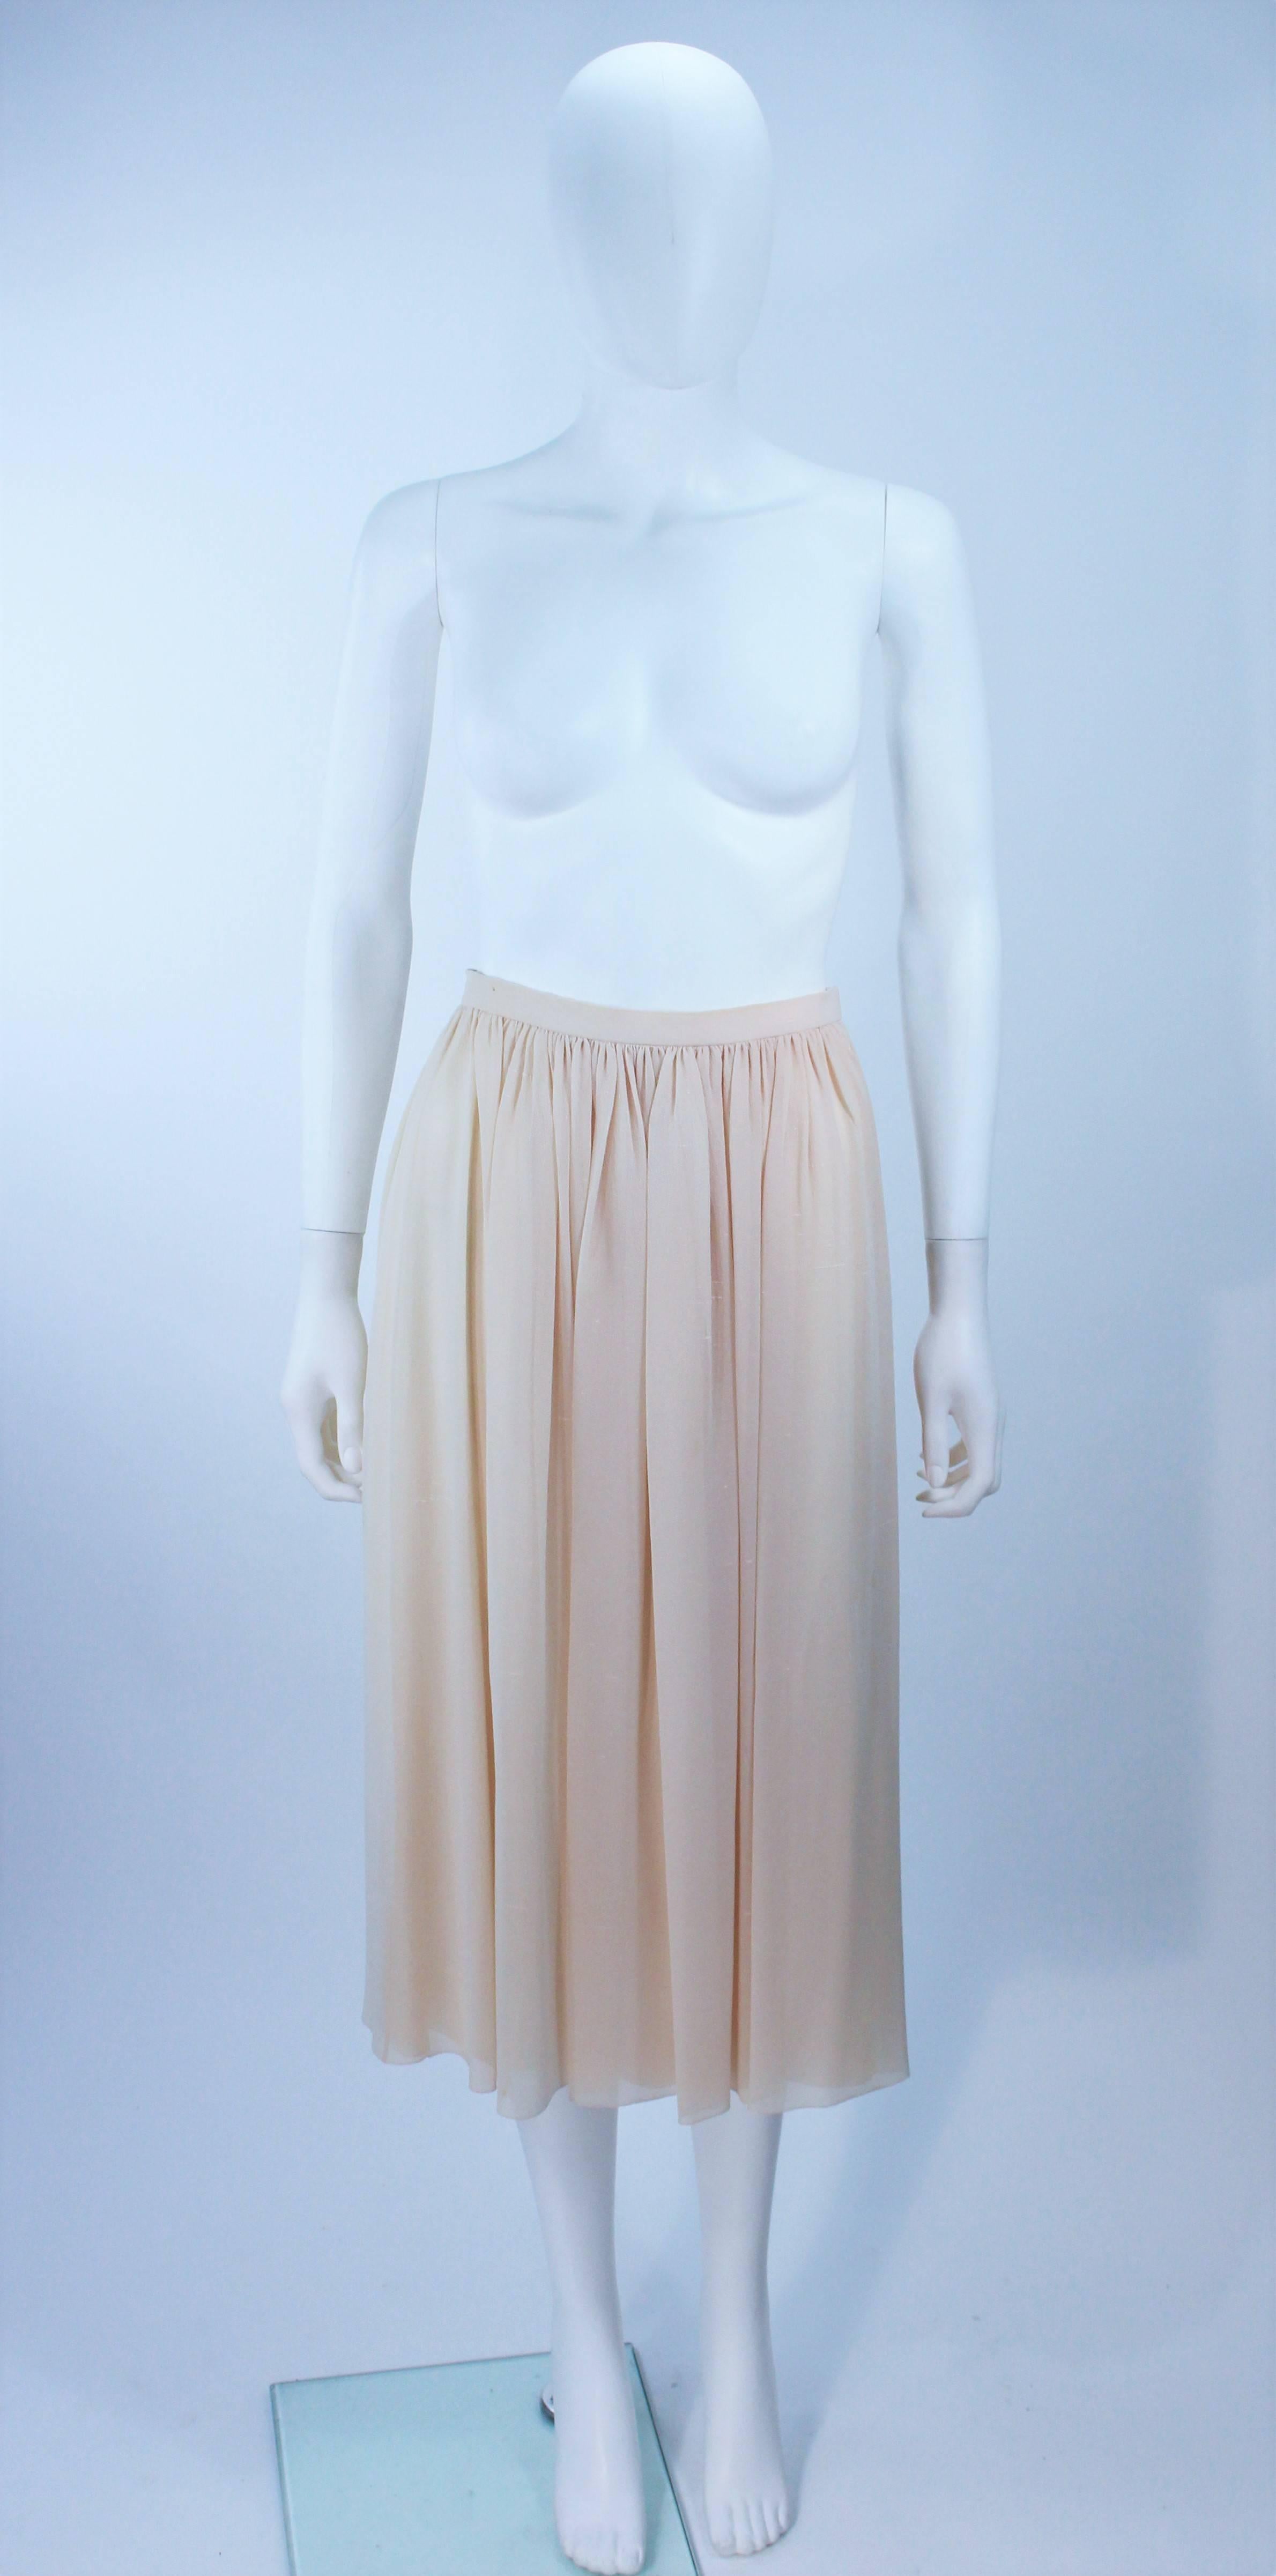 CHRISTIAN DIOR COUTURE Betsy Bloomingdale Silk Chiffon Skirt & Blouse Set Size 2 For Sale 1